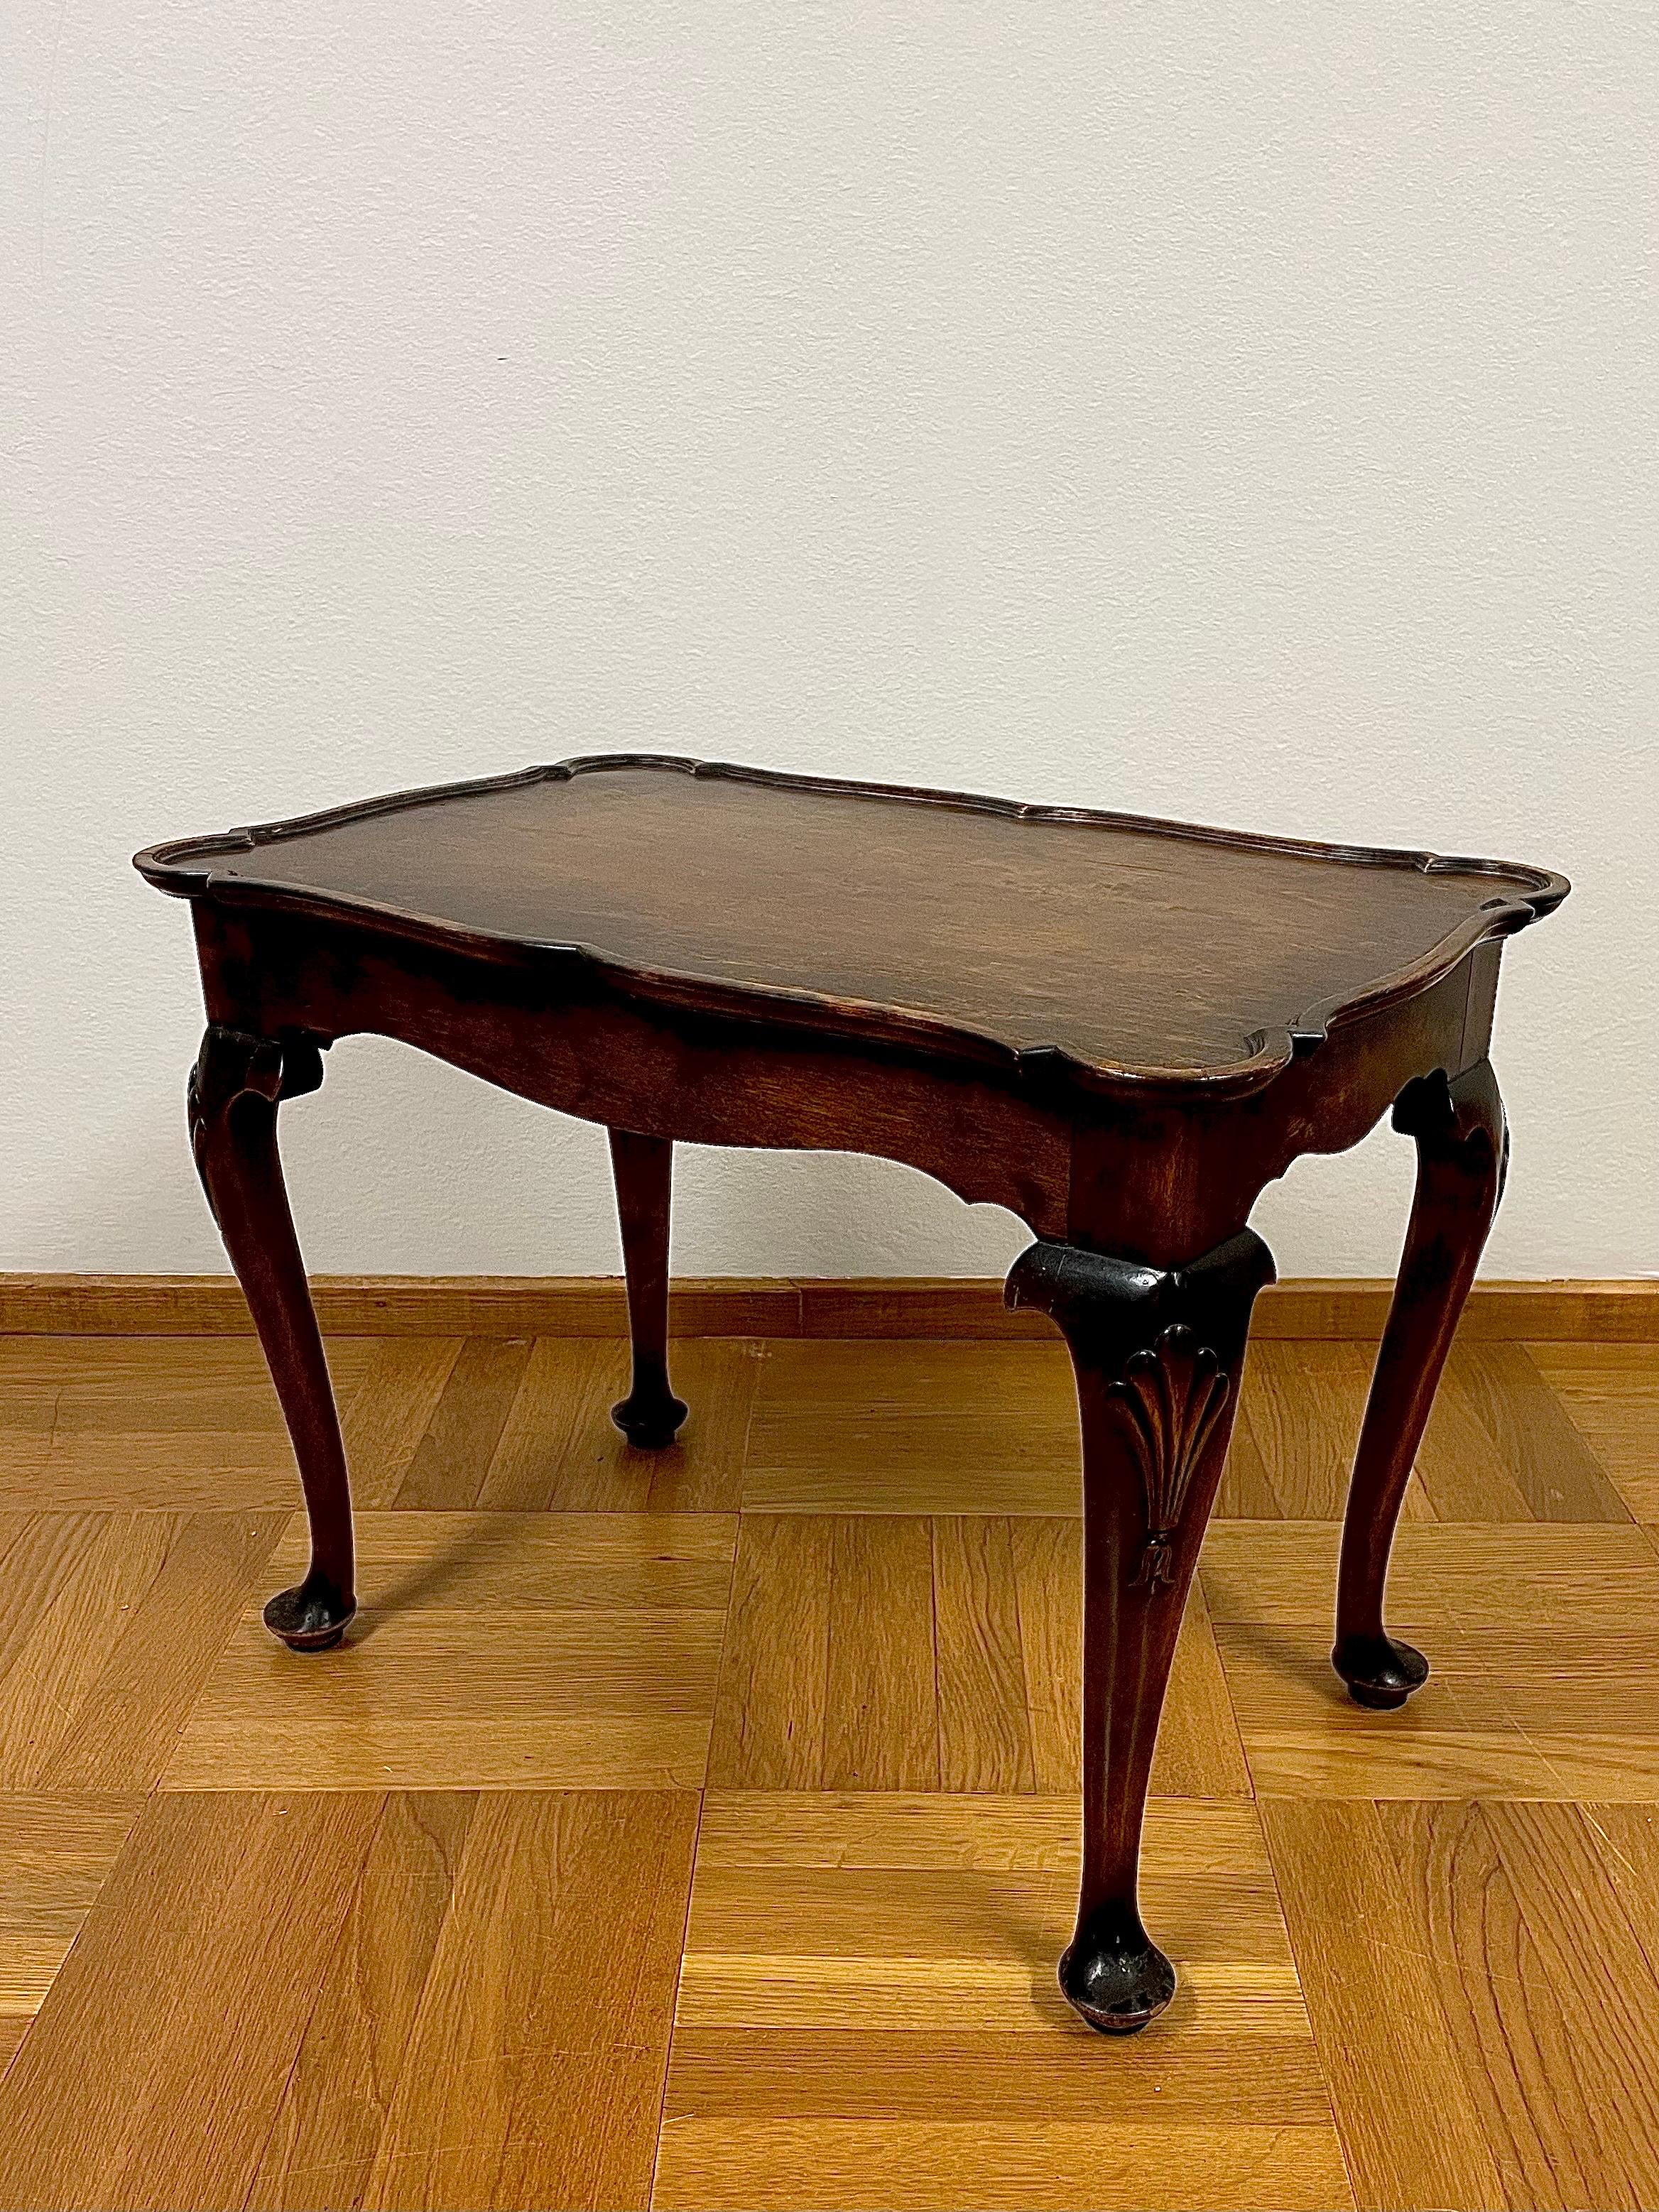 Swedish Tray Table in Stained Birch Manufactured 13/3 1929 by Nordiska Kompaniet In Good Condition For Sale In Örebro, SE